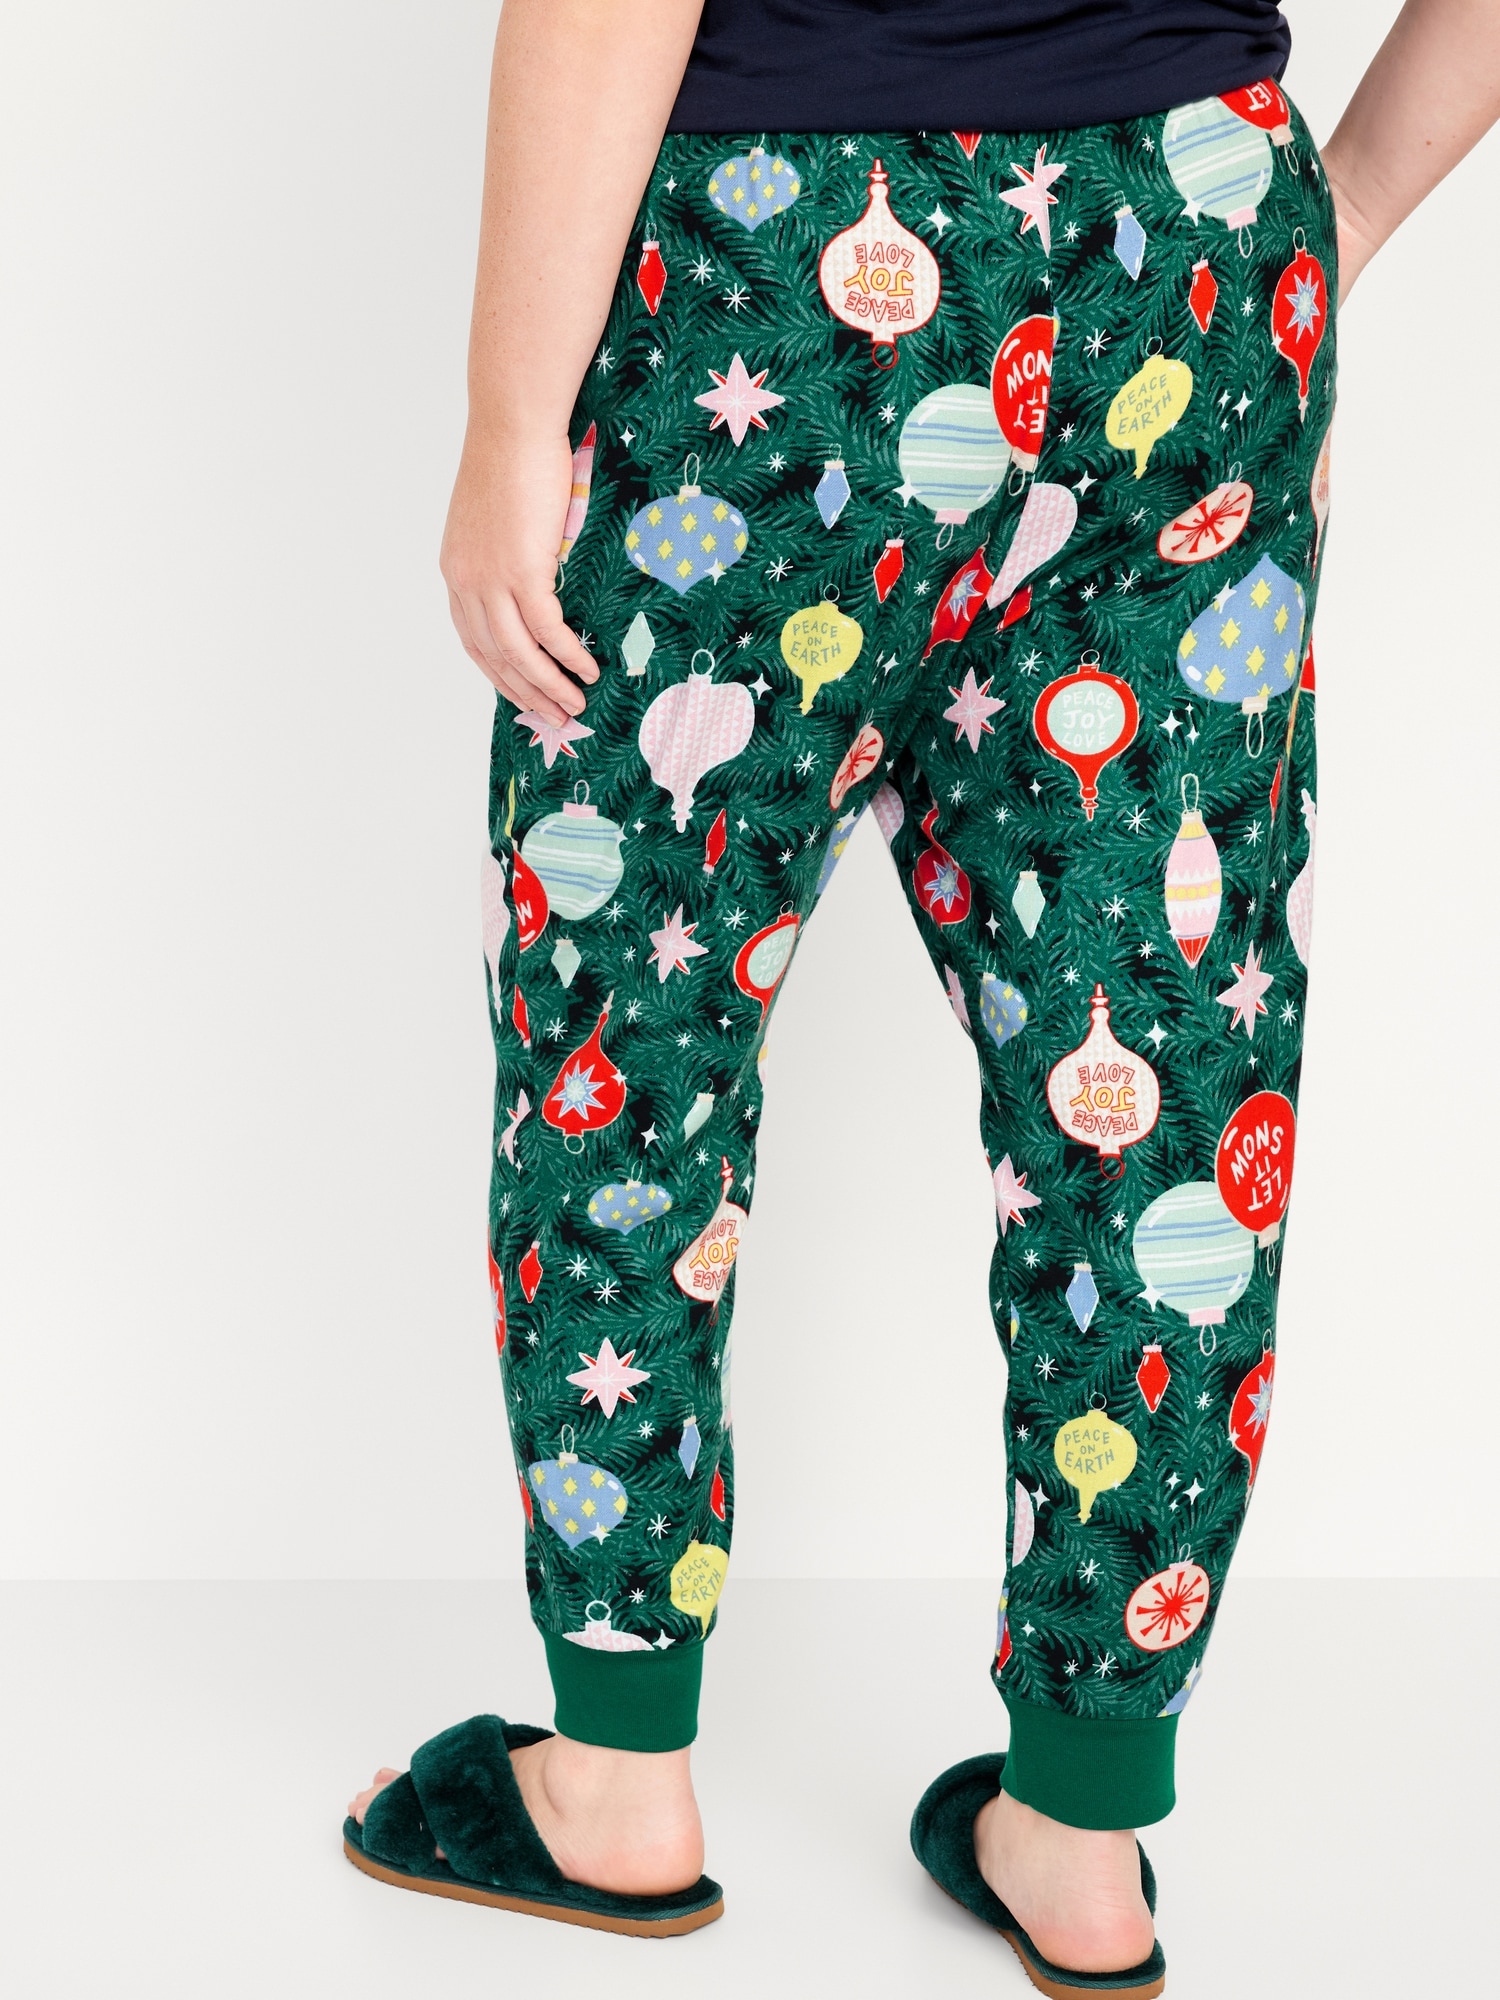 Matching Flannel Jogger Pajama Pants for Women | Old Navy